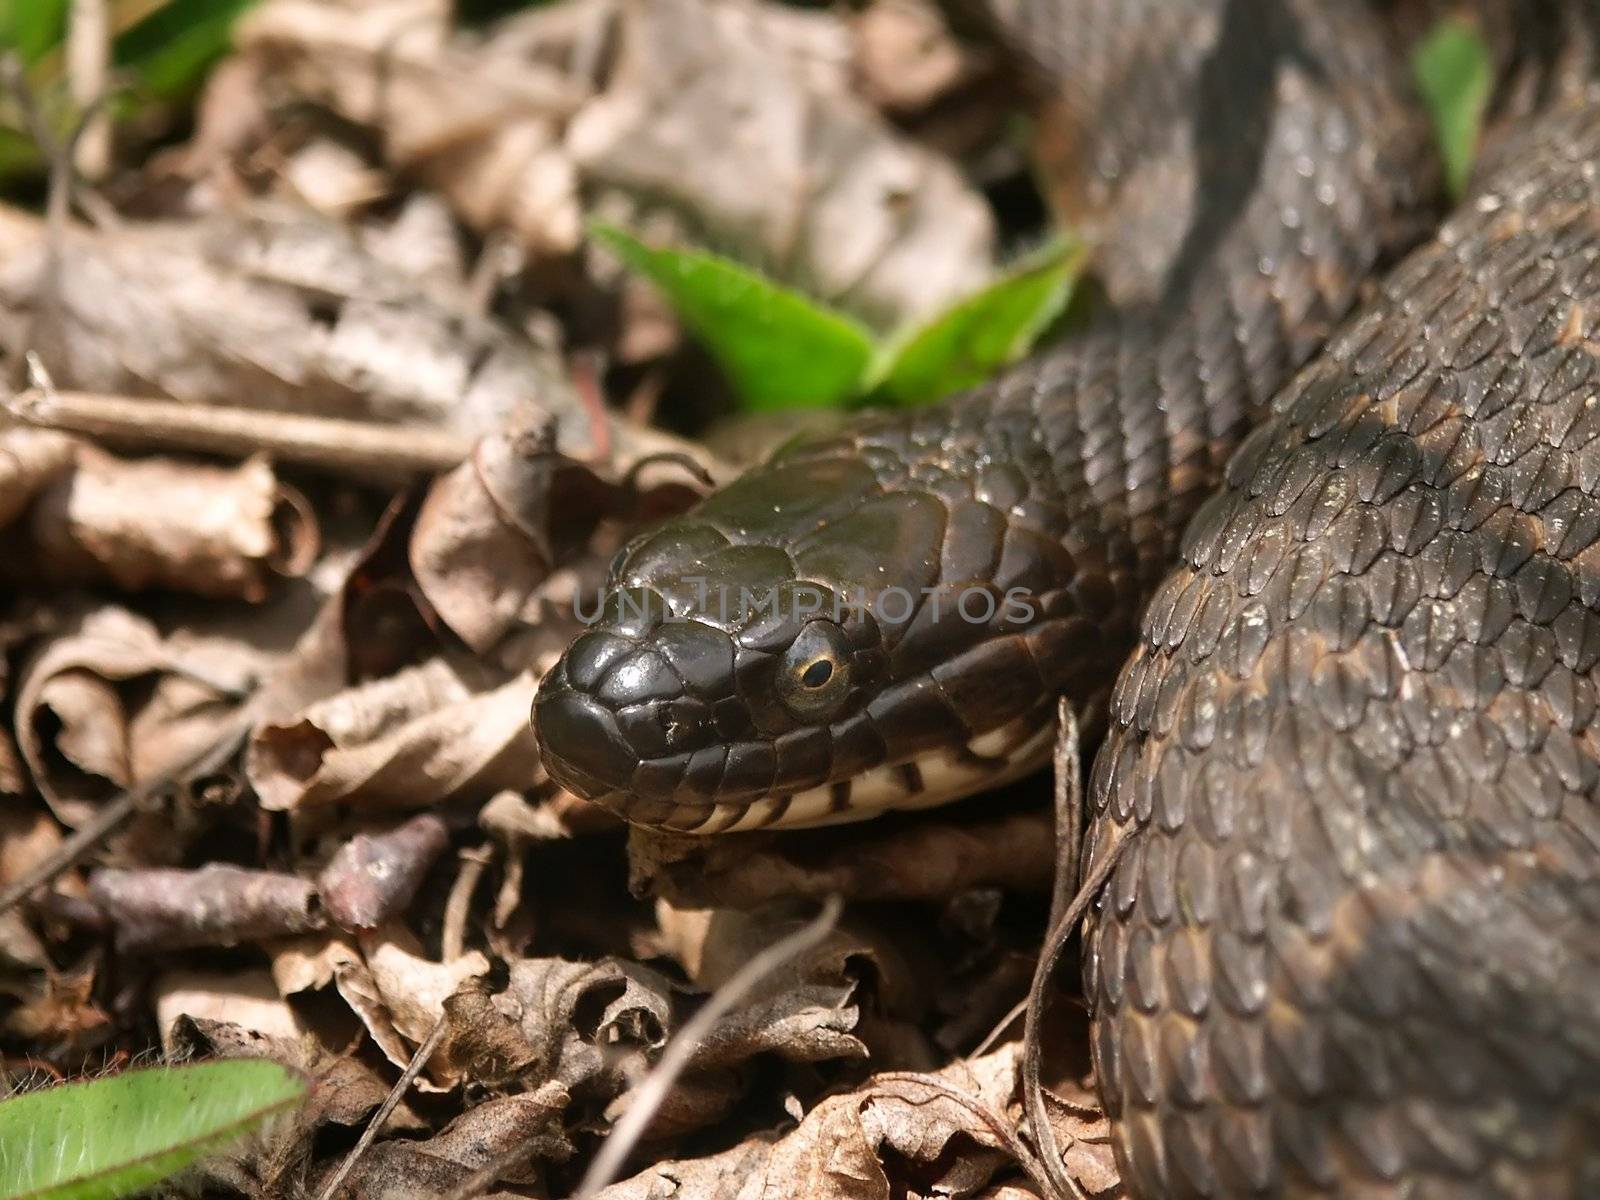 Northern Watersnake (Nerodia sipedon) by Wirepec